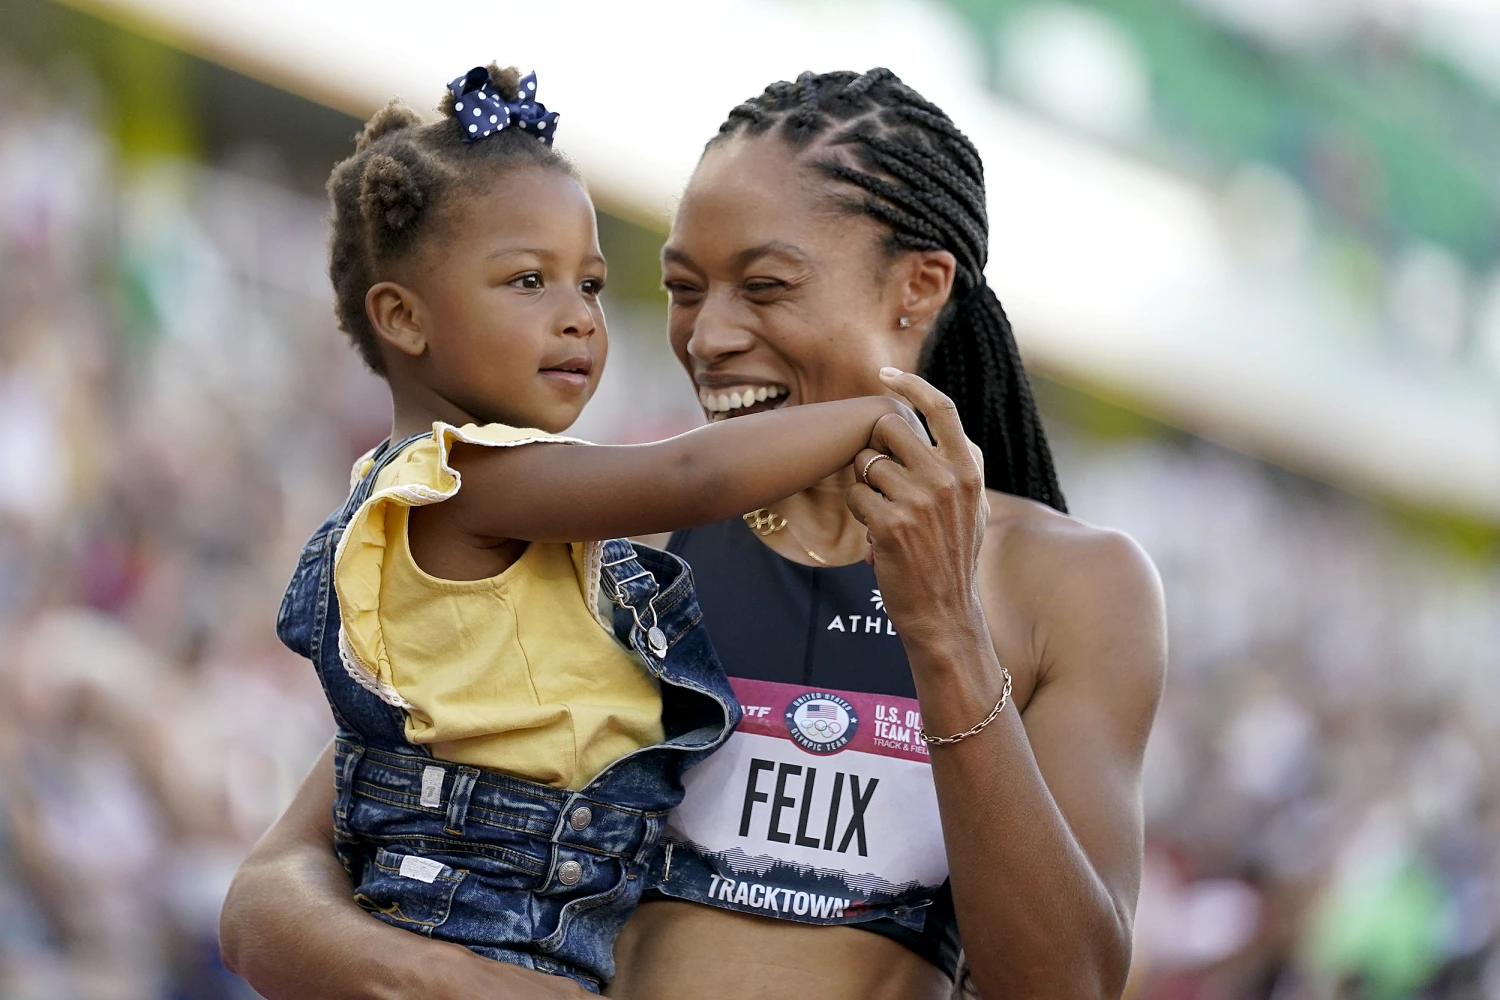 Breaking news: track and field star Allyson Felix is in tears over the loss of her precious daught…click for details